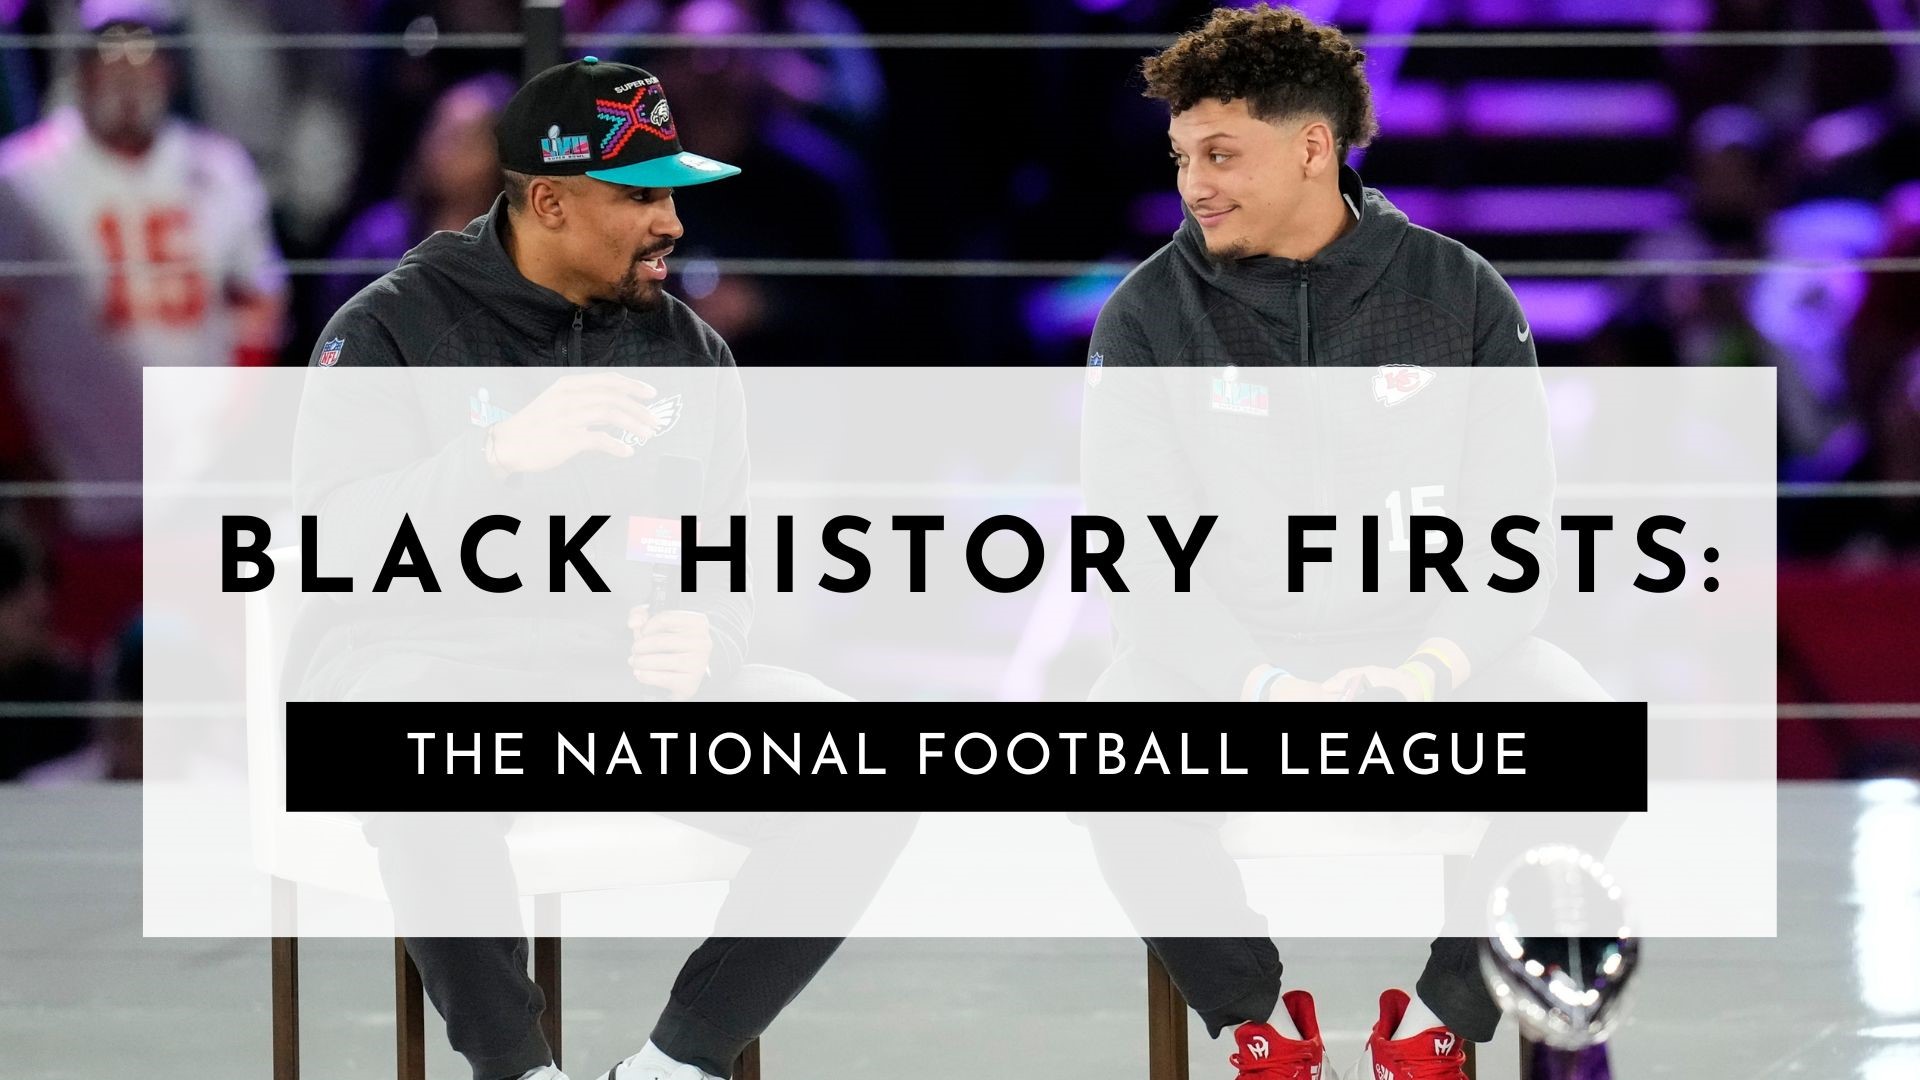 As Super Bowl LVII marks the first time two starting black quarterbacks will play, we look at other African American firsts in the NFL.